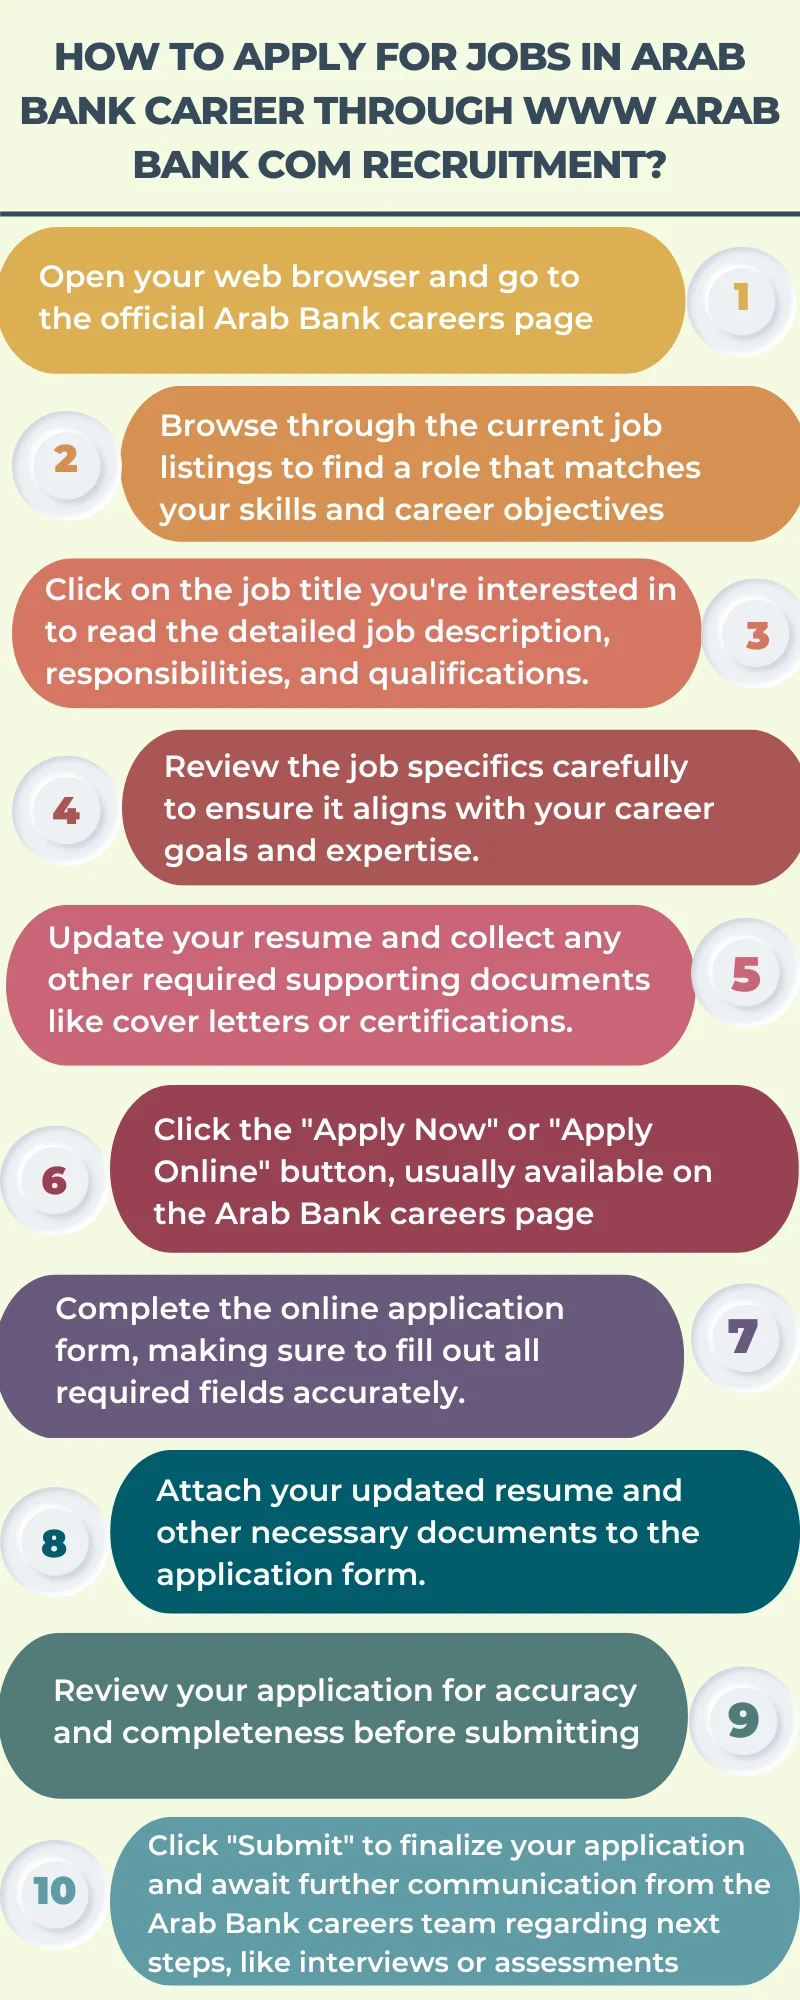 How to Apply for Jobs in Arab Bank Career through www Arab Bank com recruitment?